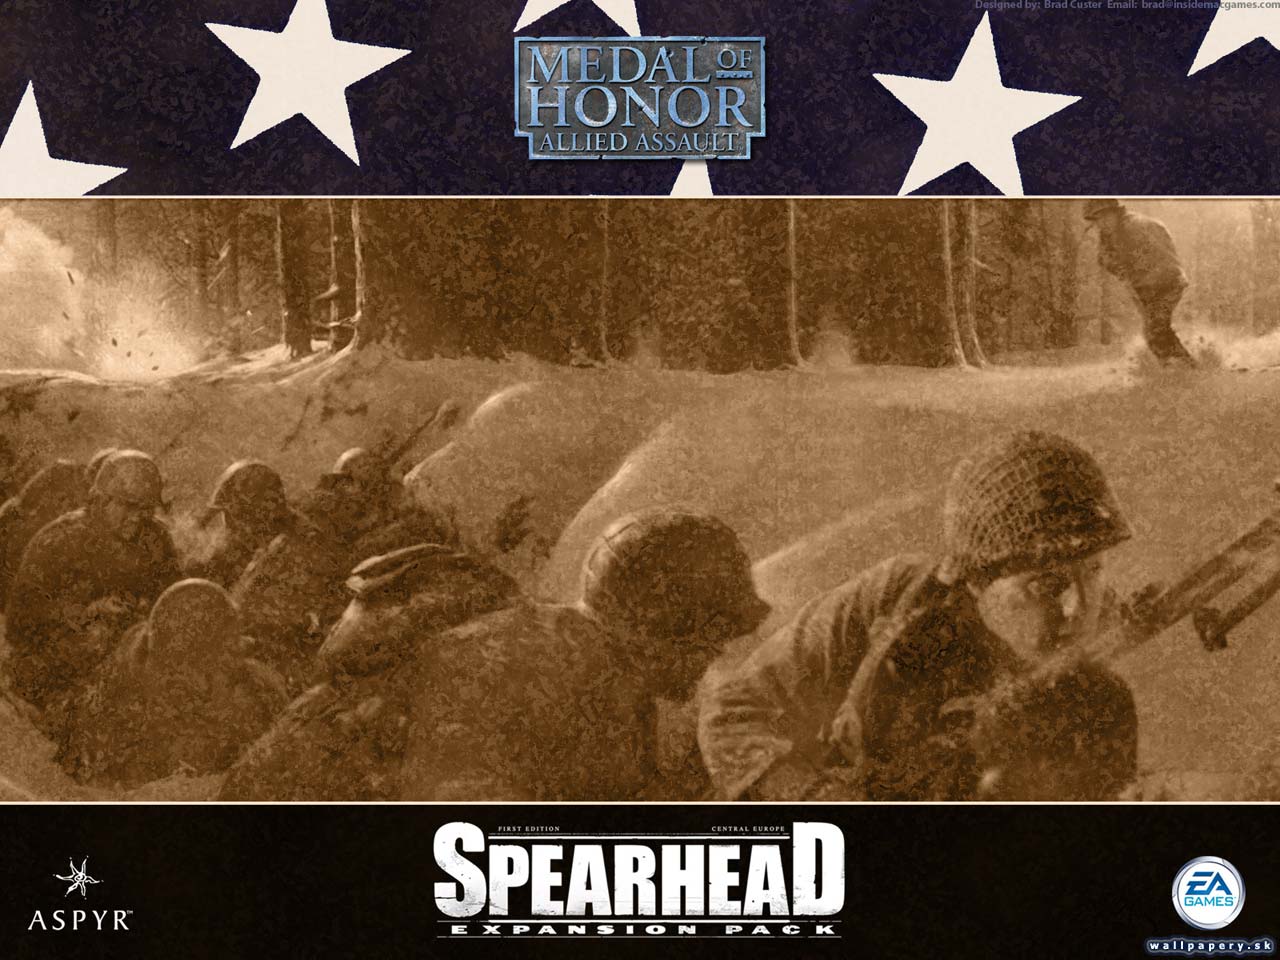 Medal of Honor: Allied Assault: Spearhead - wallpaper 1